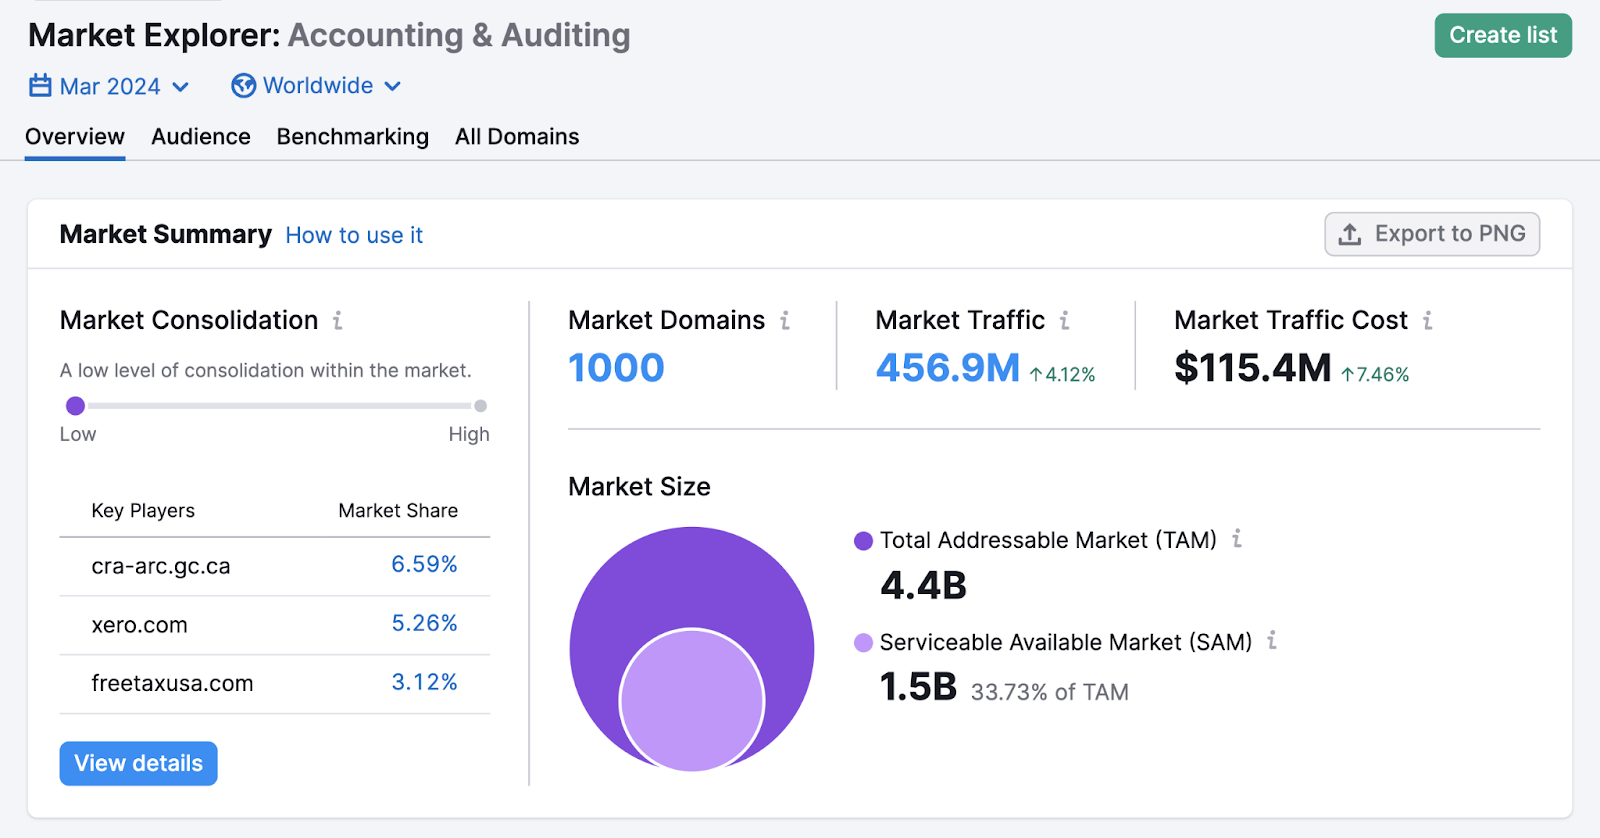 The accounting and auditing industry has low market consolidation, 1000 domains, 456.9m market traffic, and TAM of 4.4B